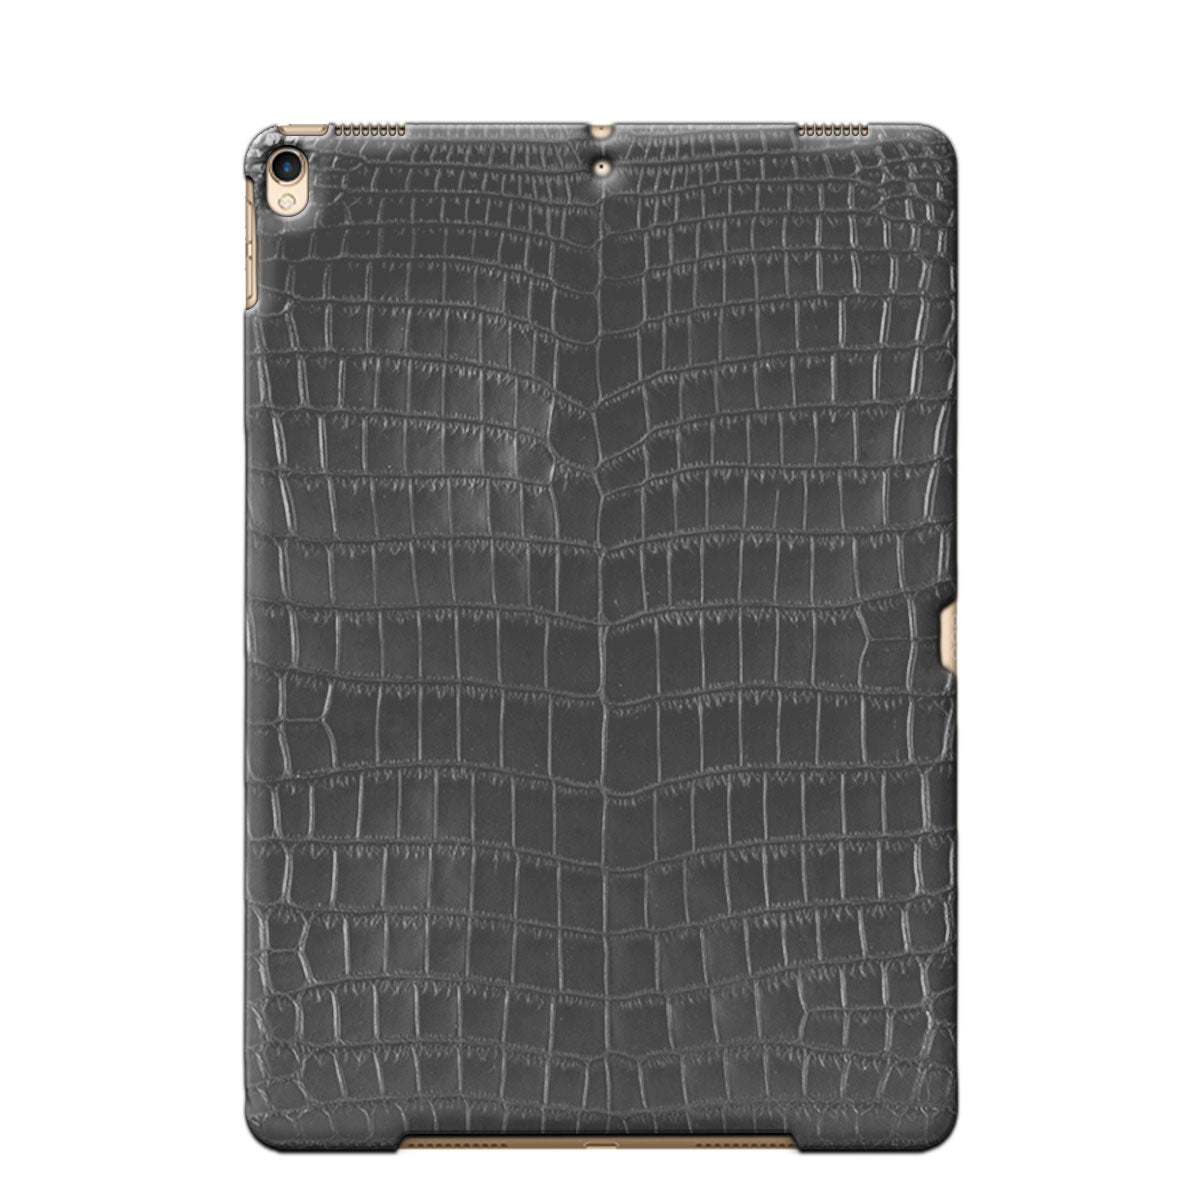 Leather iPad case / cover - iPad Pro 10.5 & 11 inches ( 2nd , 3rd & 4th generation ) - Genuine alligator